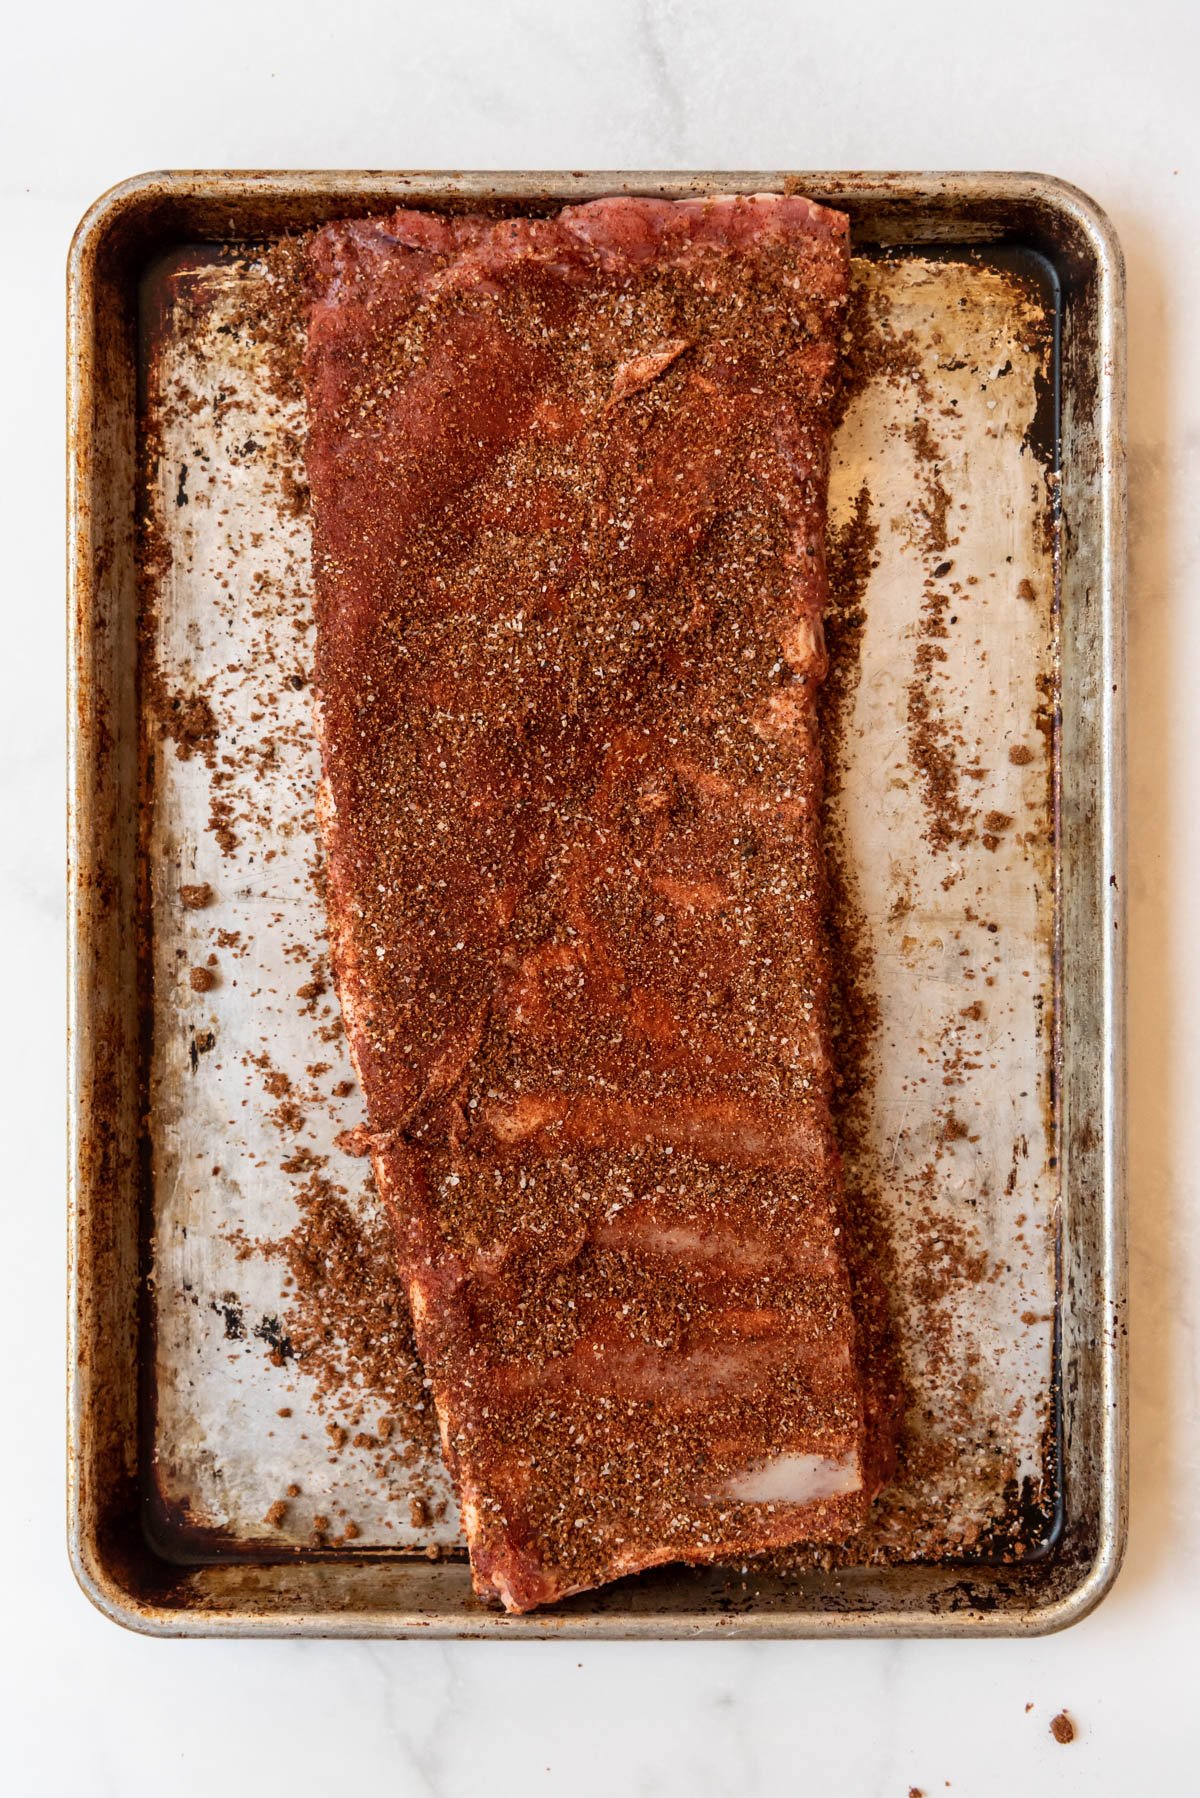 St. Louis ribs rubbed with dry rub on a baking sheet.